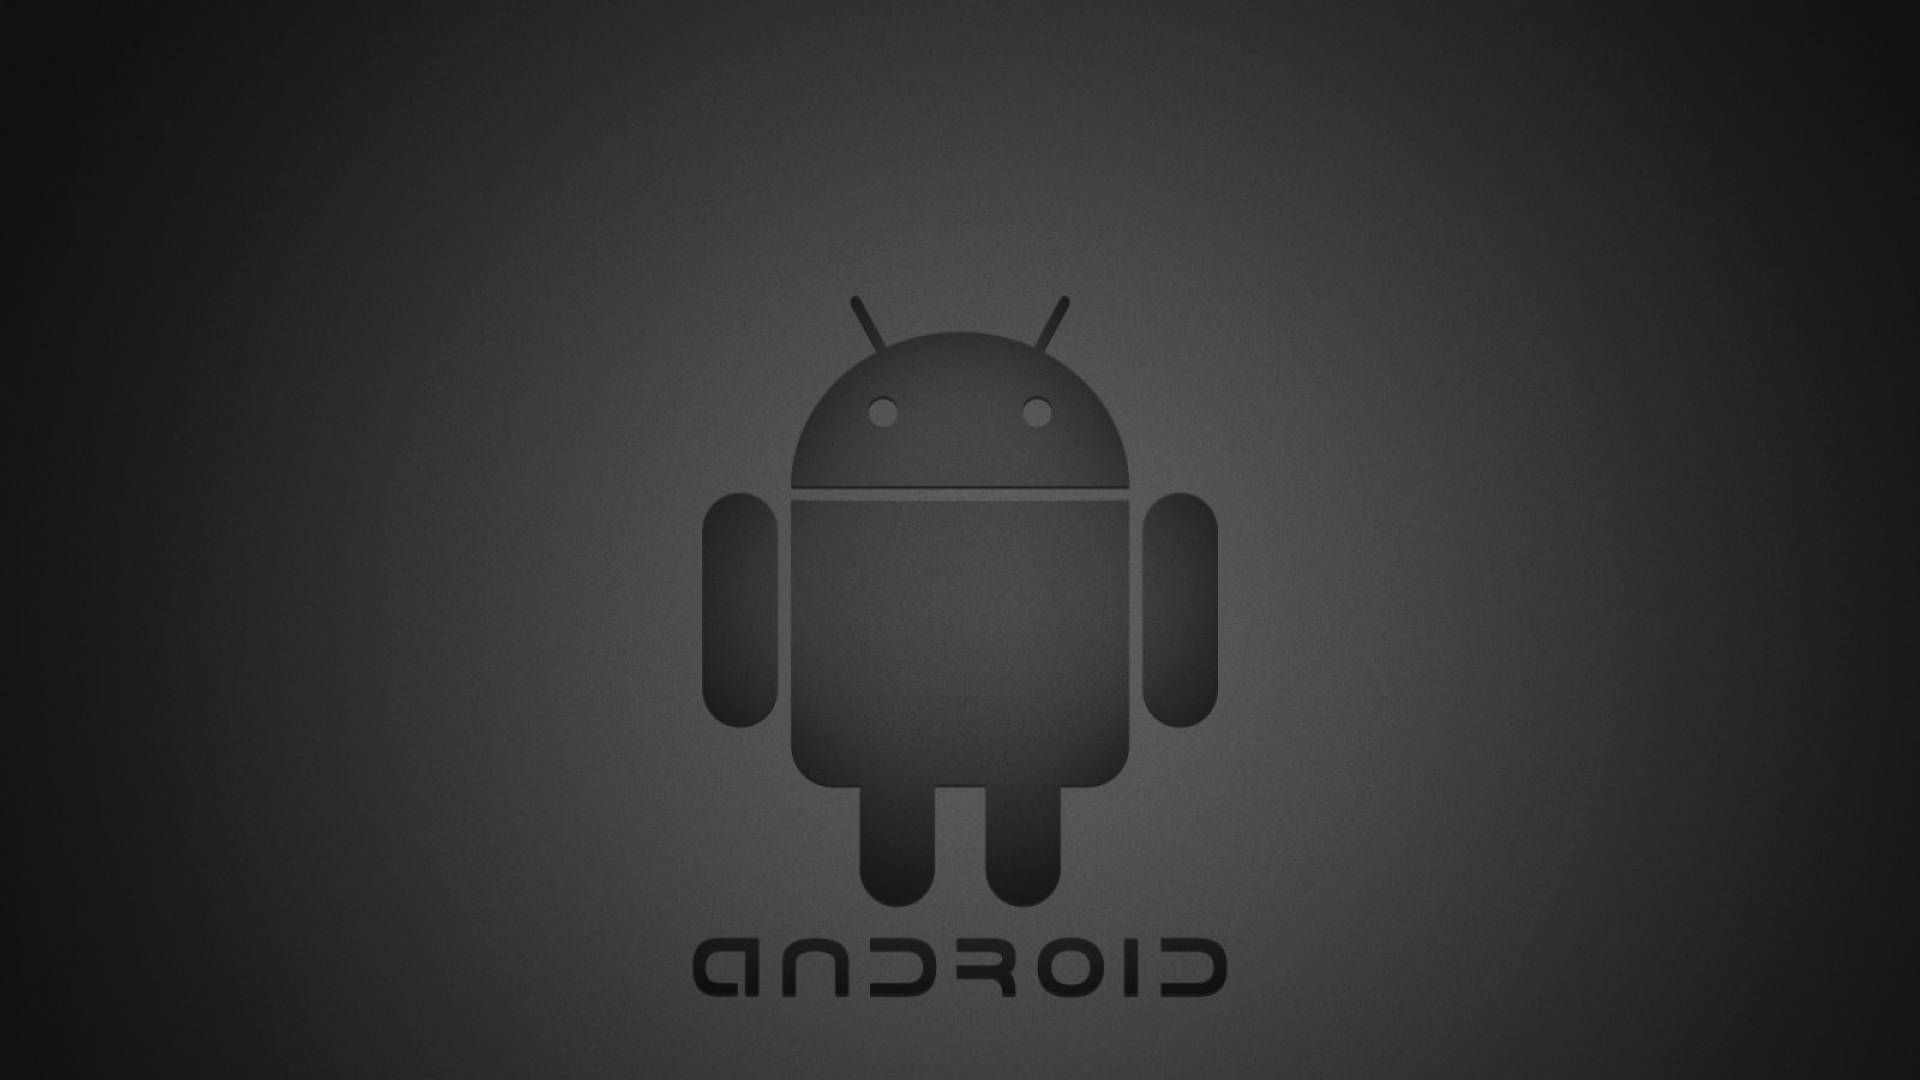 Wallpaper With Android Logo